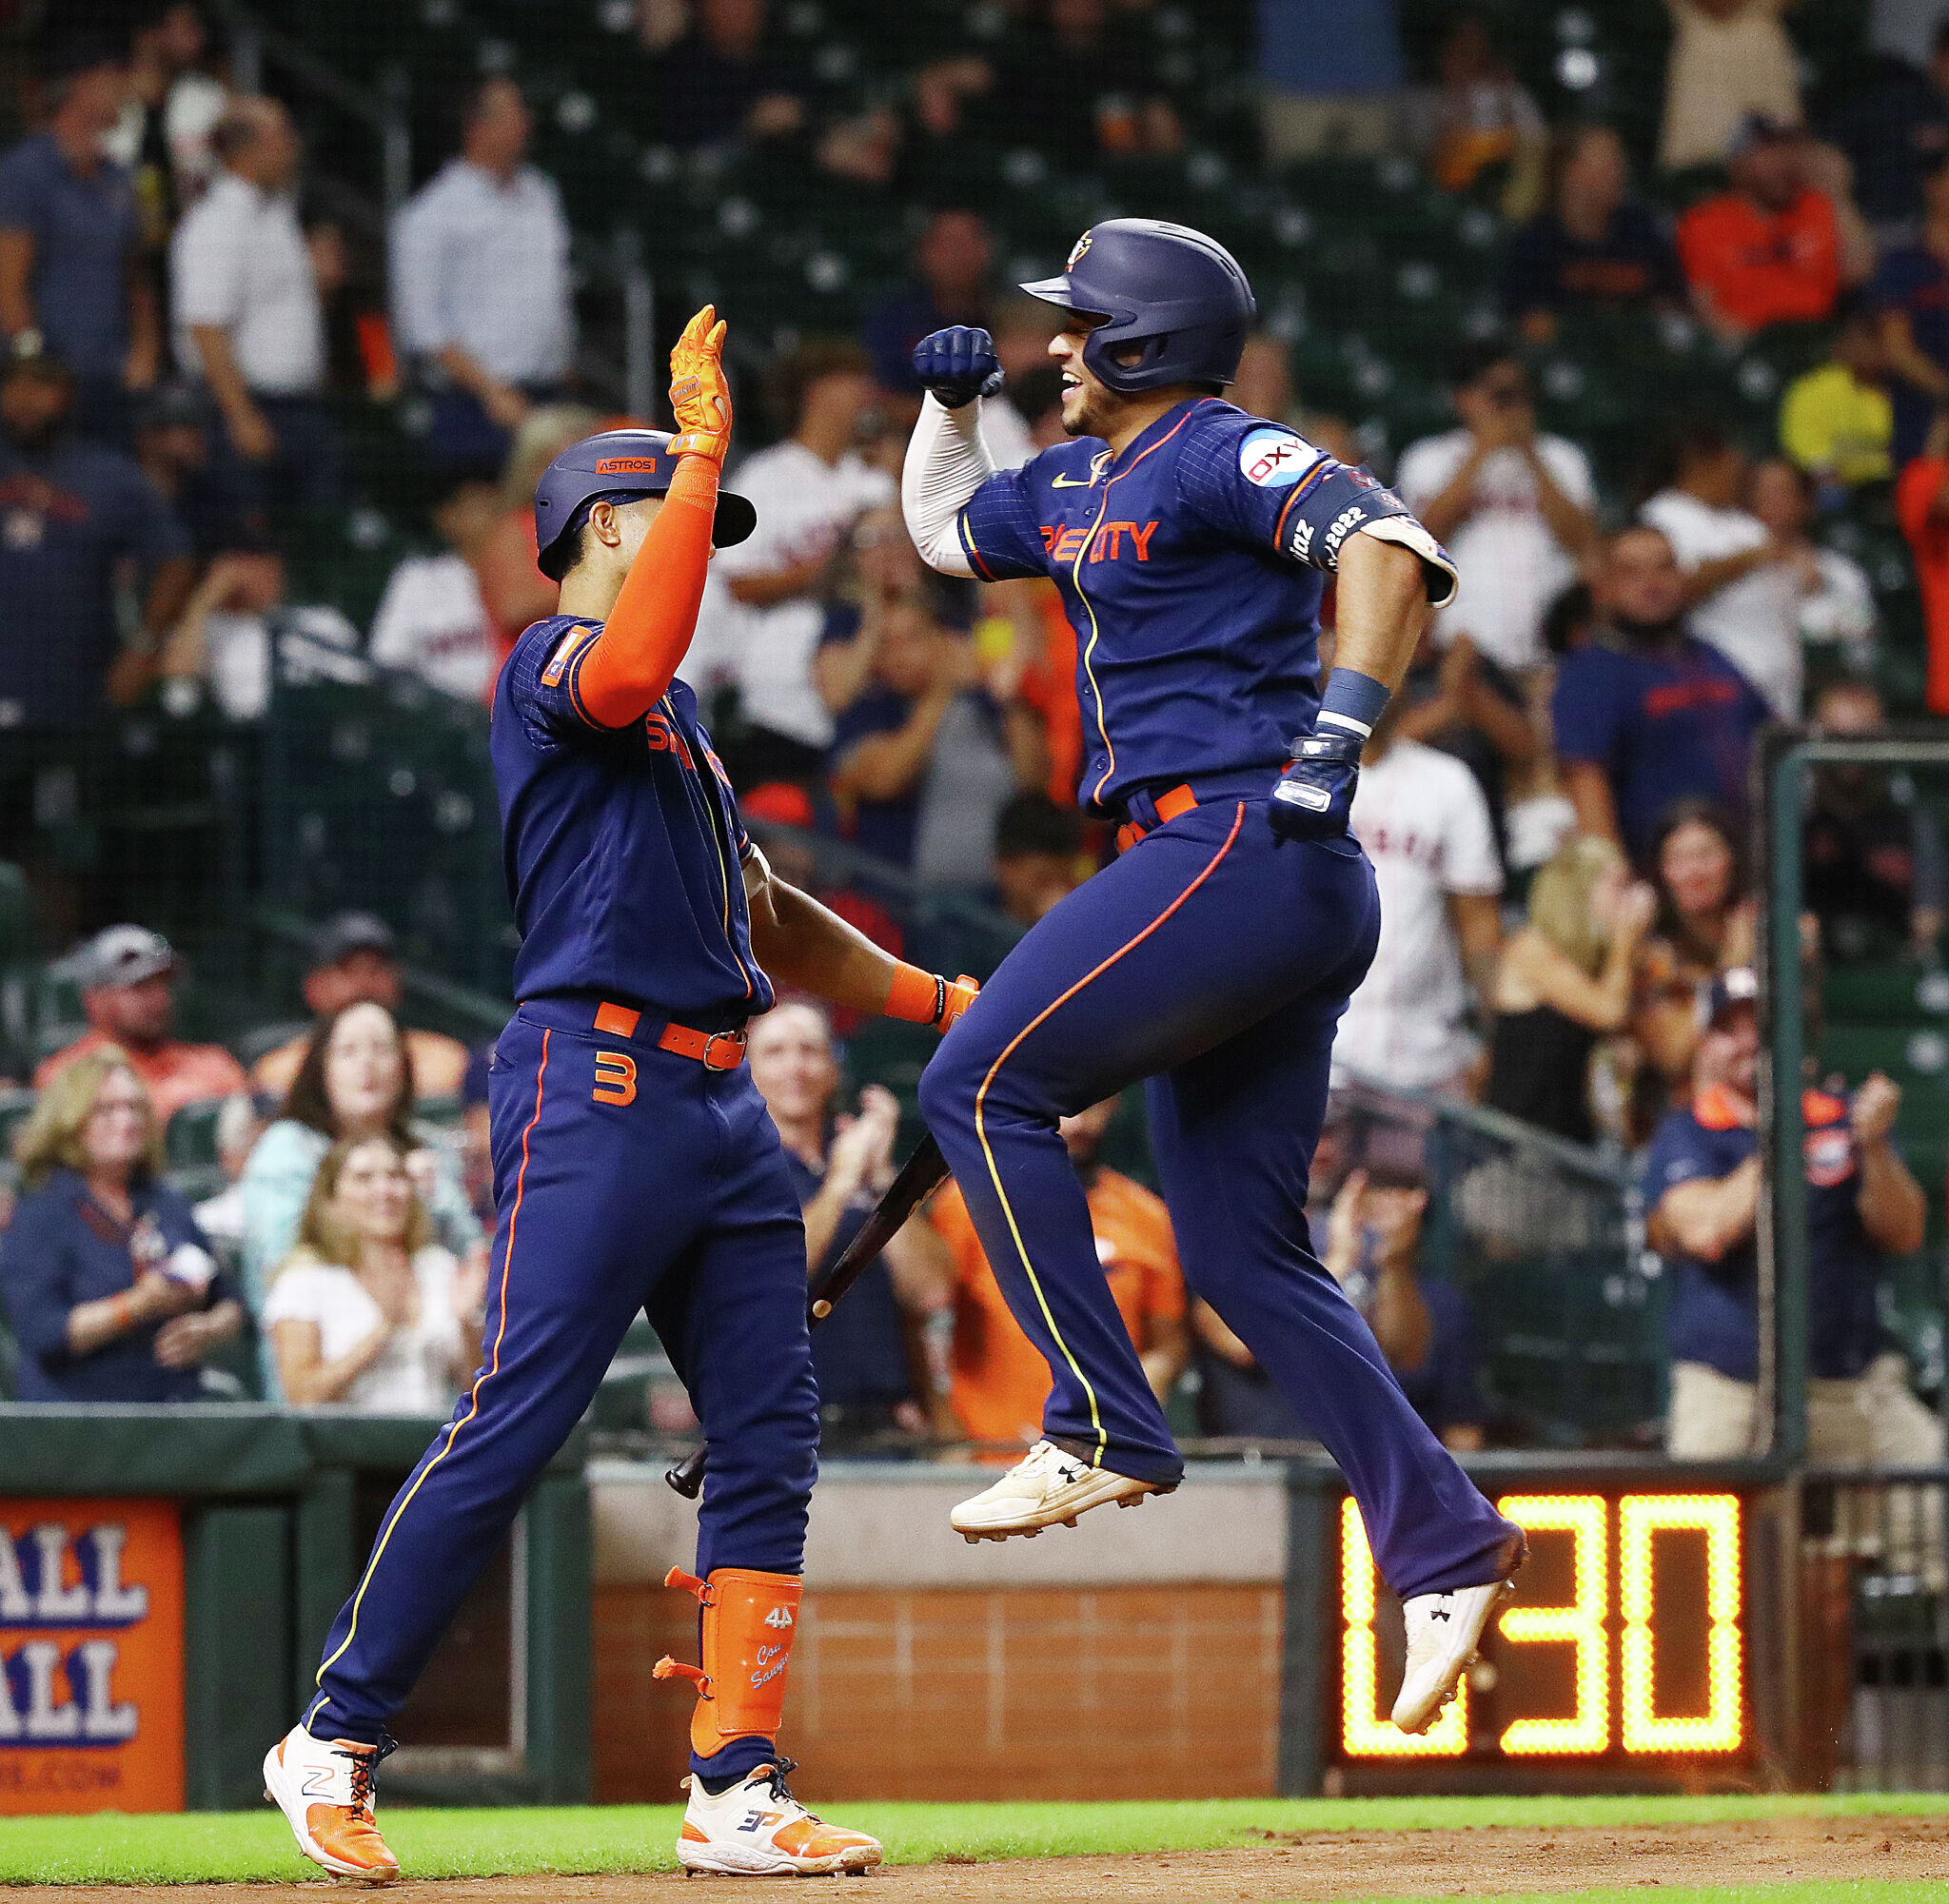 How long will Yainer Diaz play first base for the Astros?